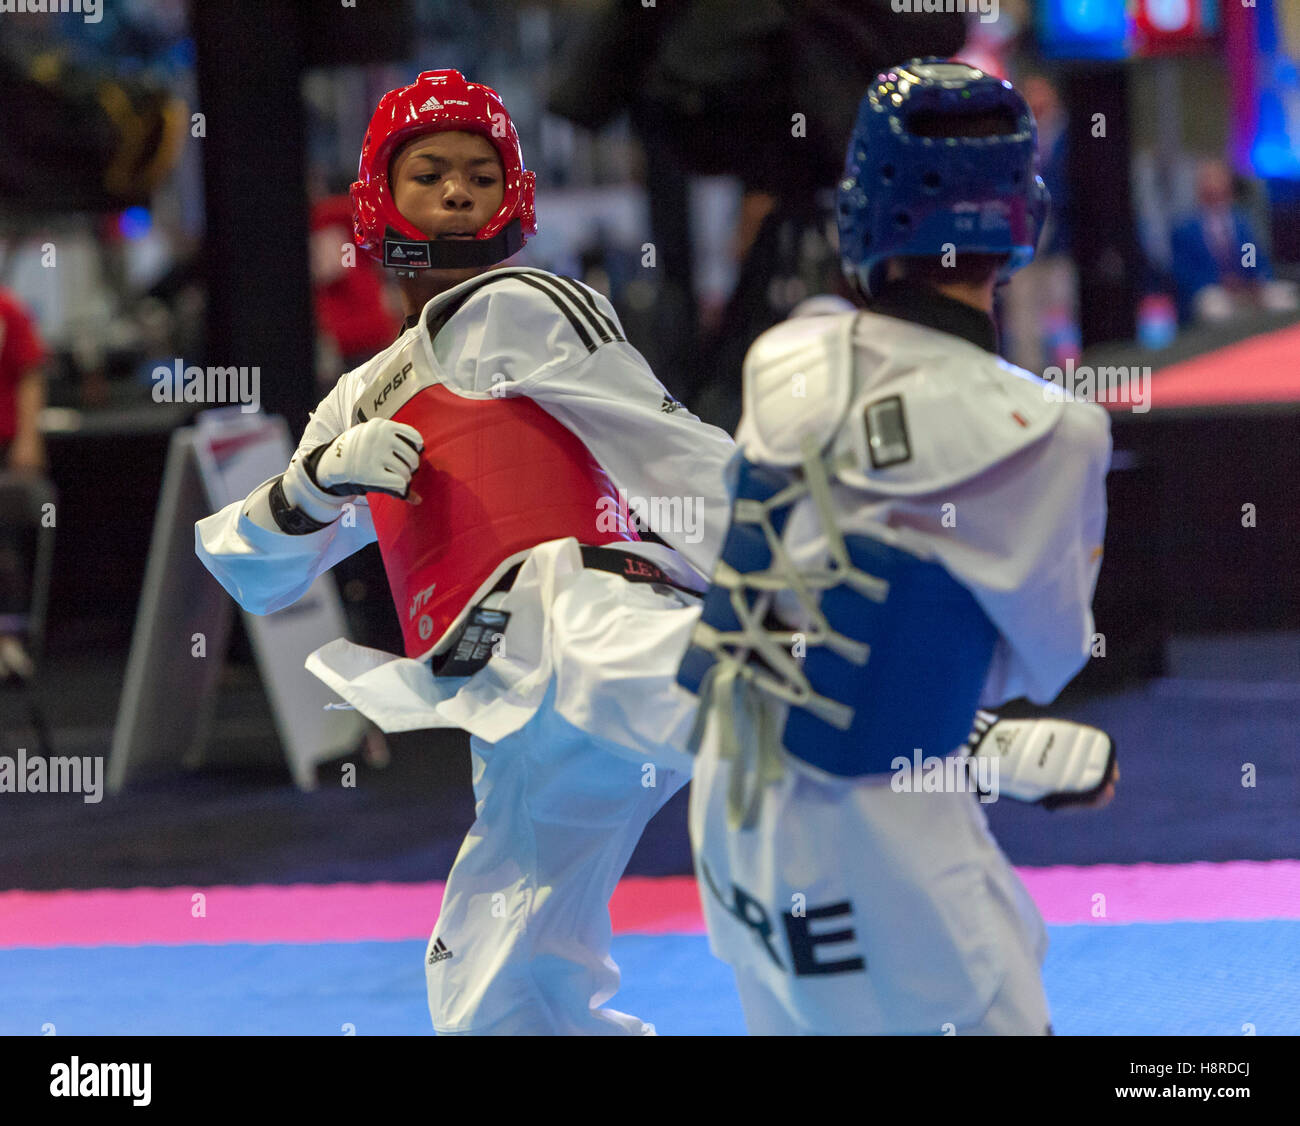 Burnaby, Canada. 16th Nov, 2016. WTF World Taekwondo Junior Championships, Georgios Ioannou (GRE) in blue and Darius Brown (CAN) in red compete in 48kg class Credit: © Peter Llewellyn/Alamy Live News  Stock Photo